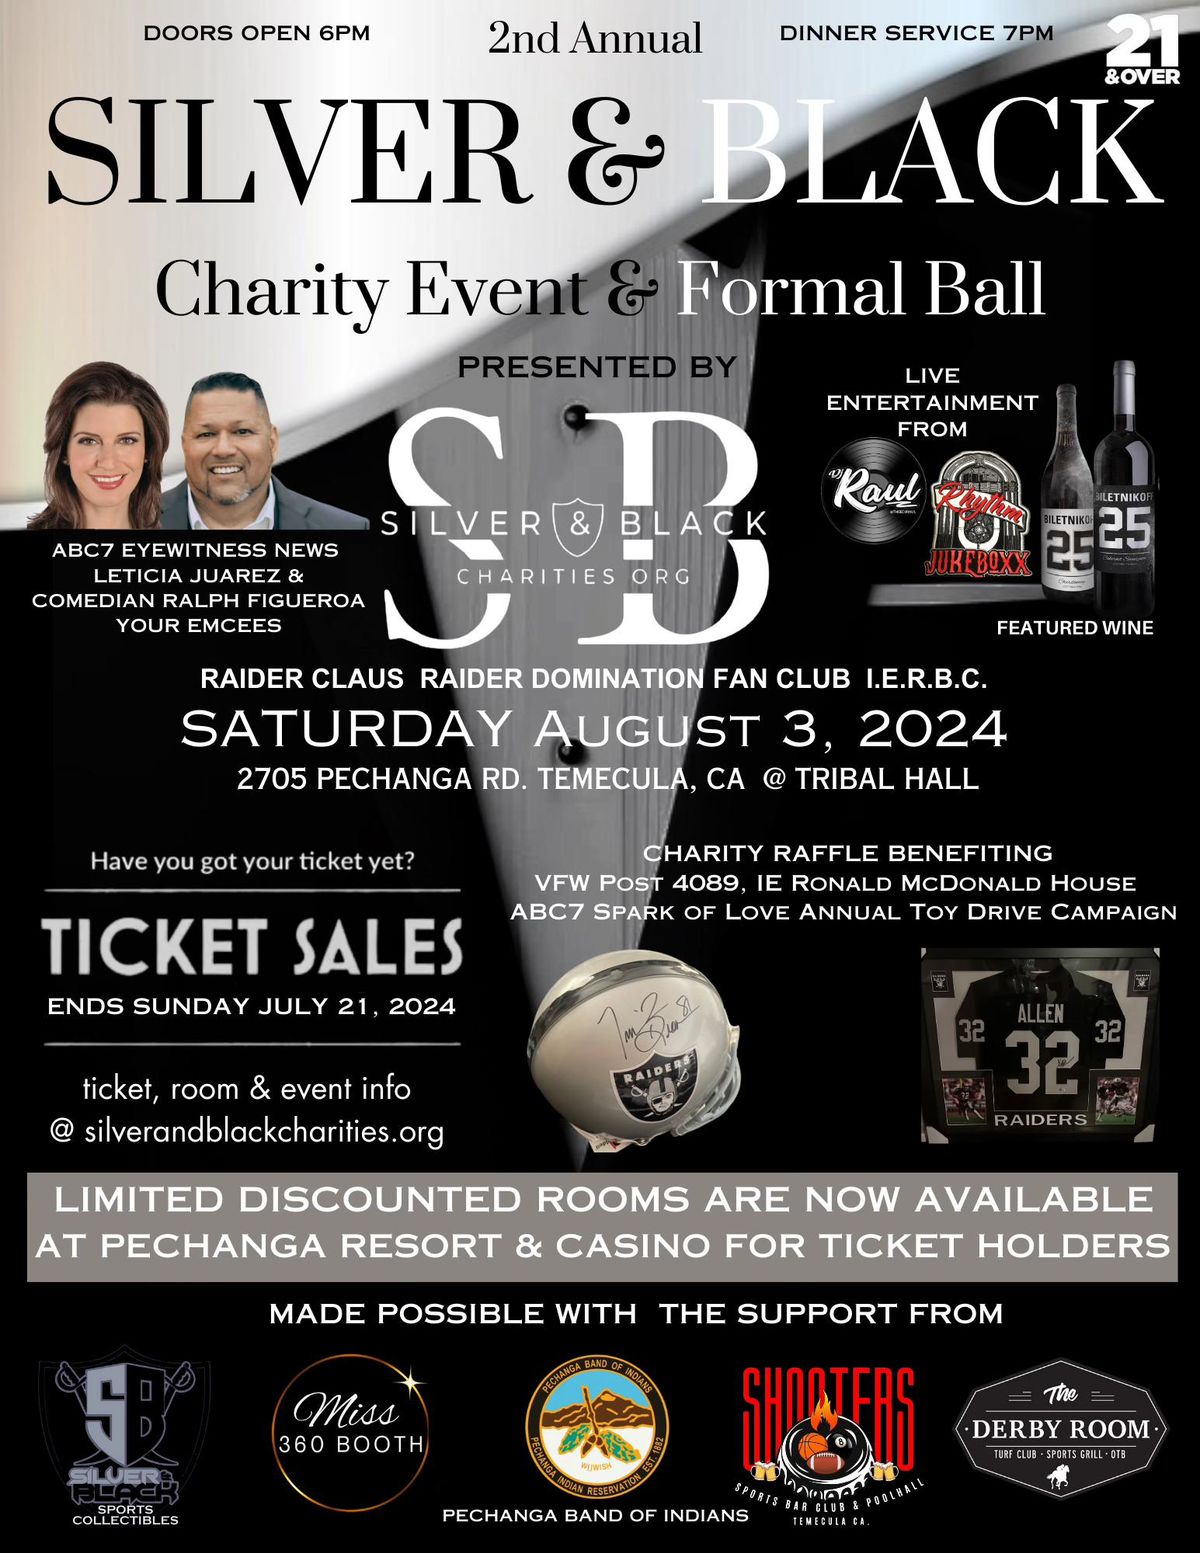 2nd Annunal Silver And Black Charity Event & Formal Ball